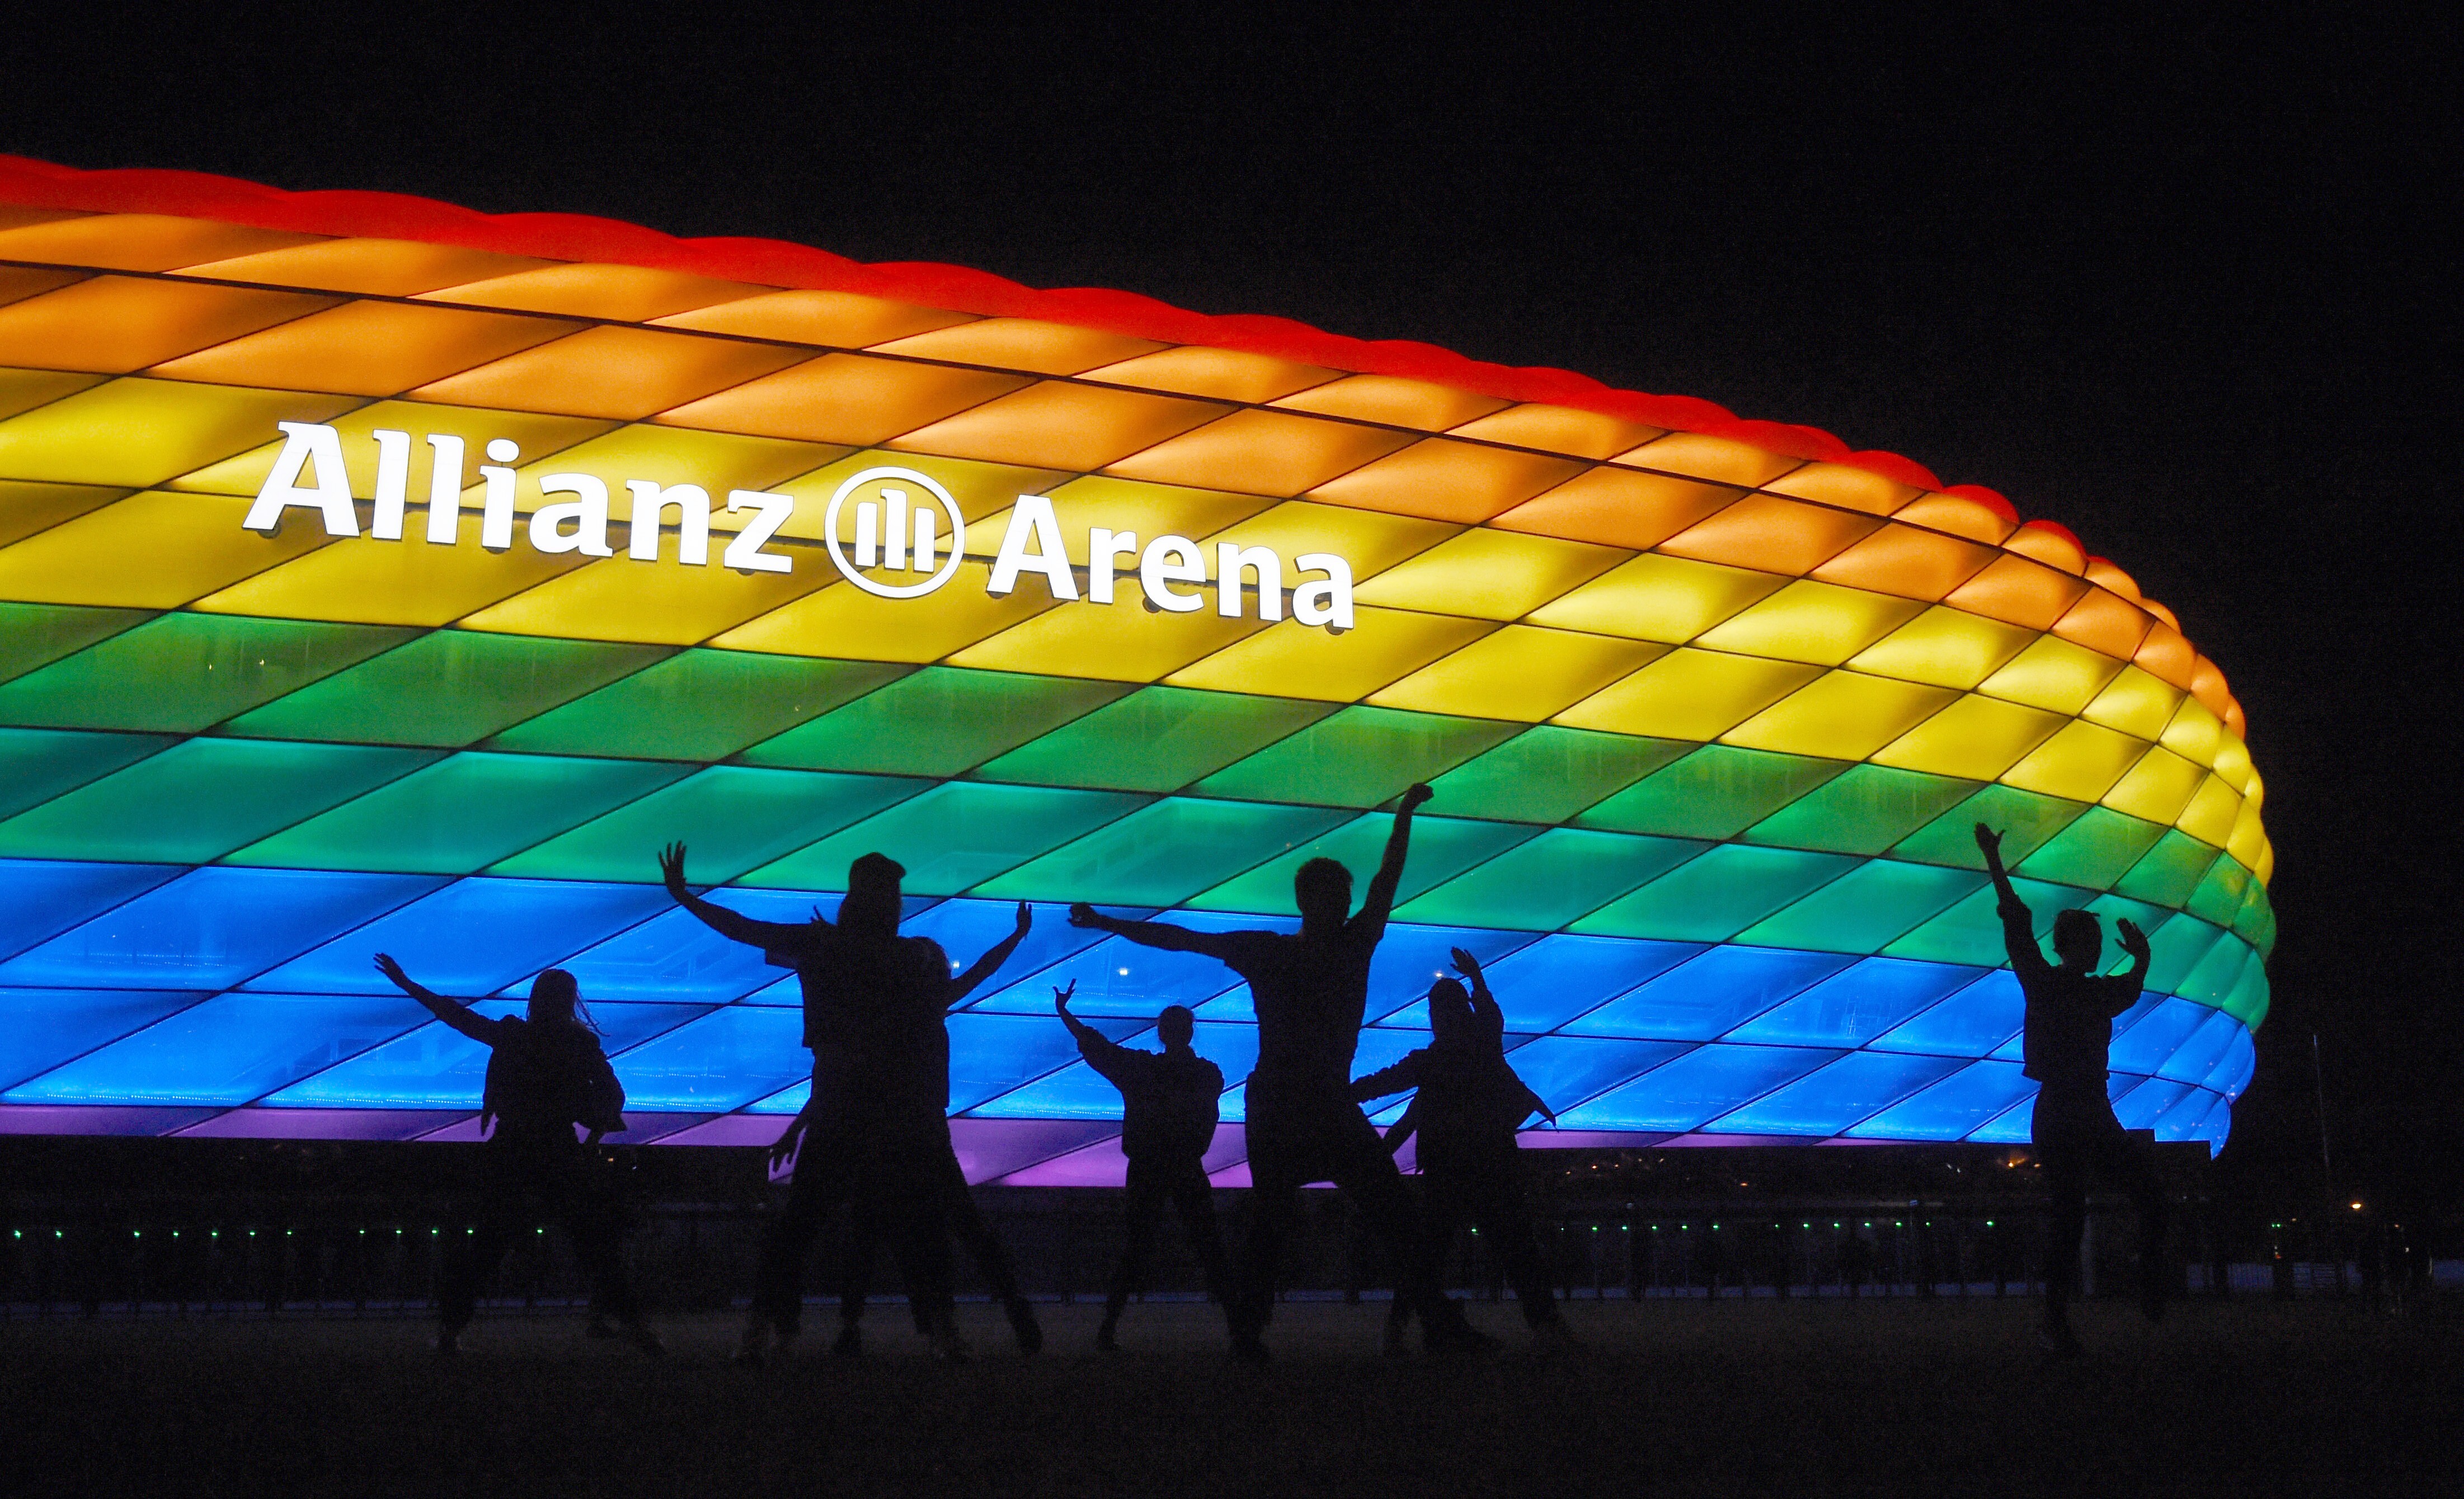 The shell of the Allianz Arena lit up in rainbow colours. Munich’s stadium cannot be illuminated in rainbow colours for Wednesday's Euro 2020 match between Germany and Hungary, the ruling body Uefa has said. Photo: Picture Alliance / DPA